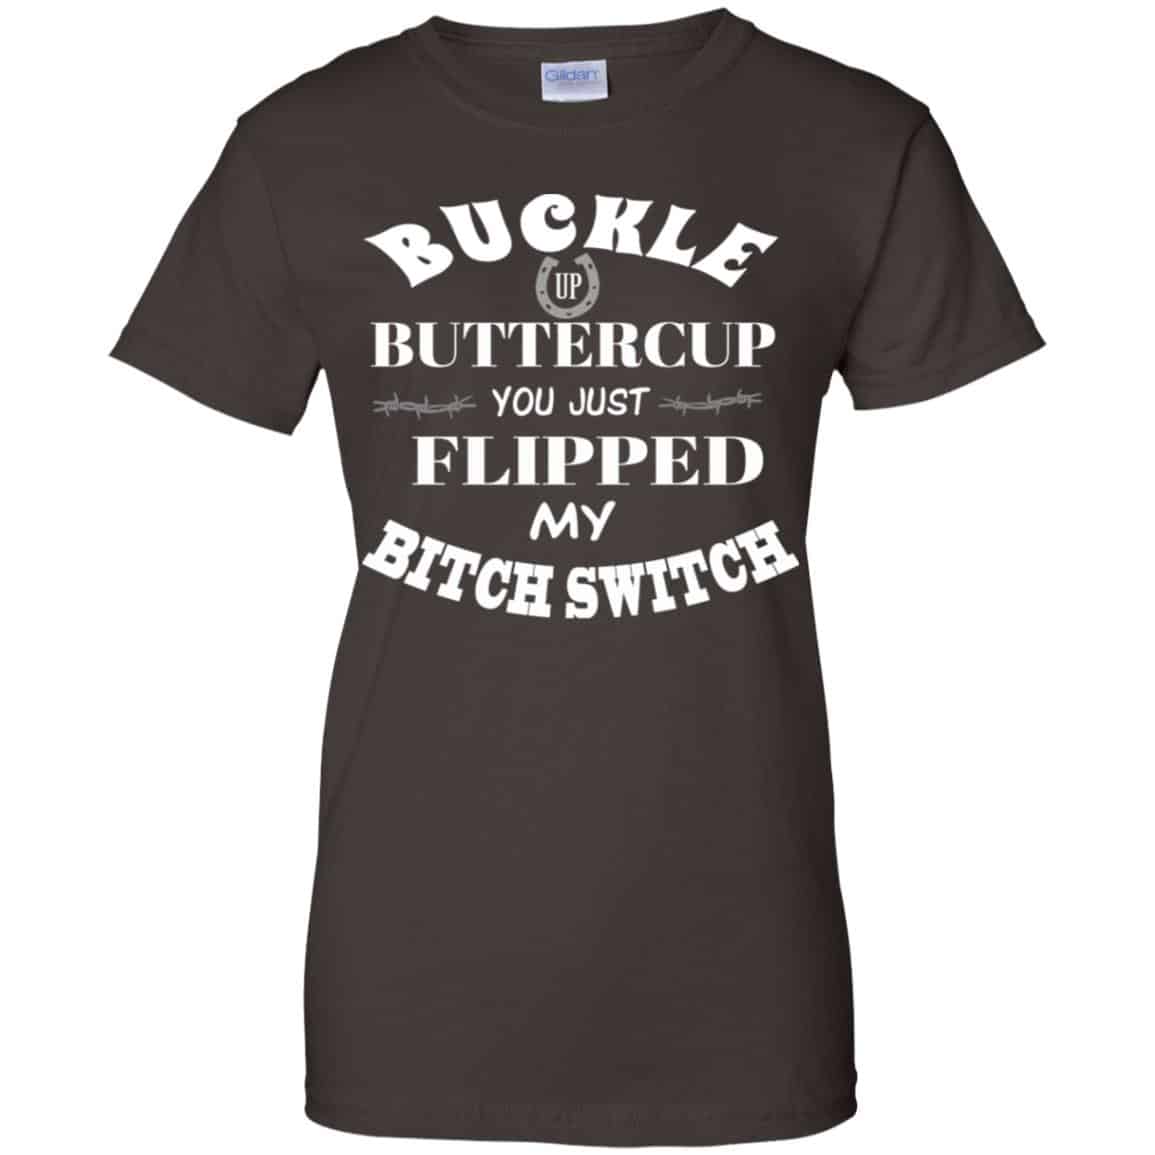 Buckle Up Buttercup You Just Flipped My Bitch Switch Shirt, Hoodie ...